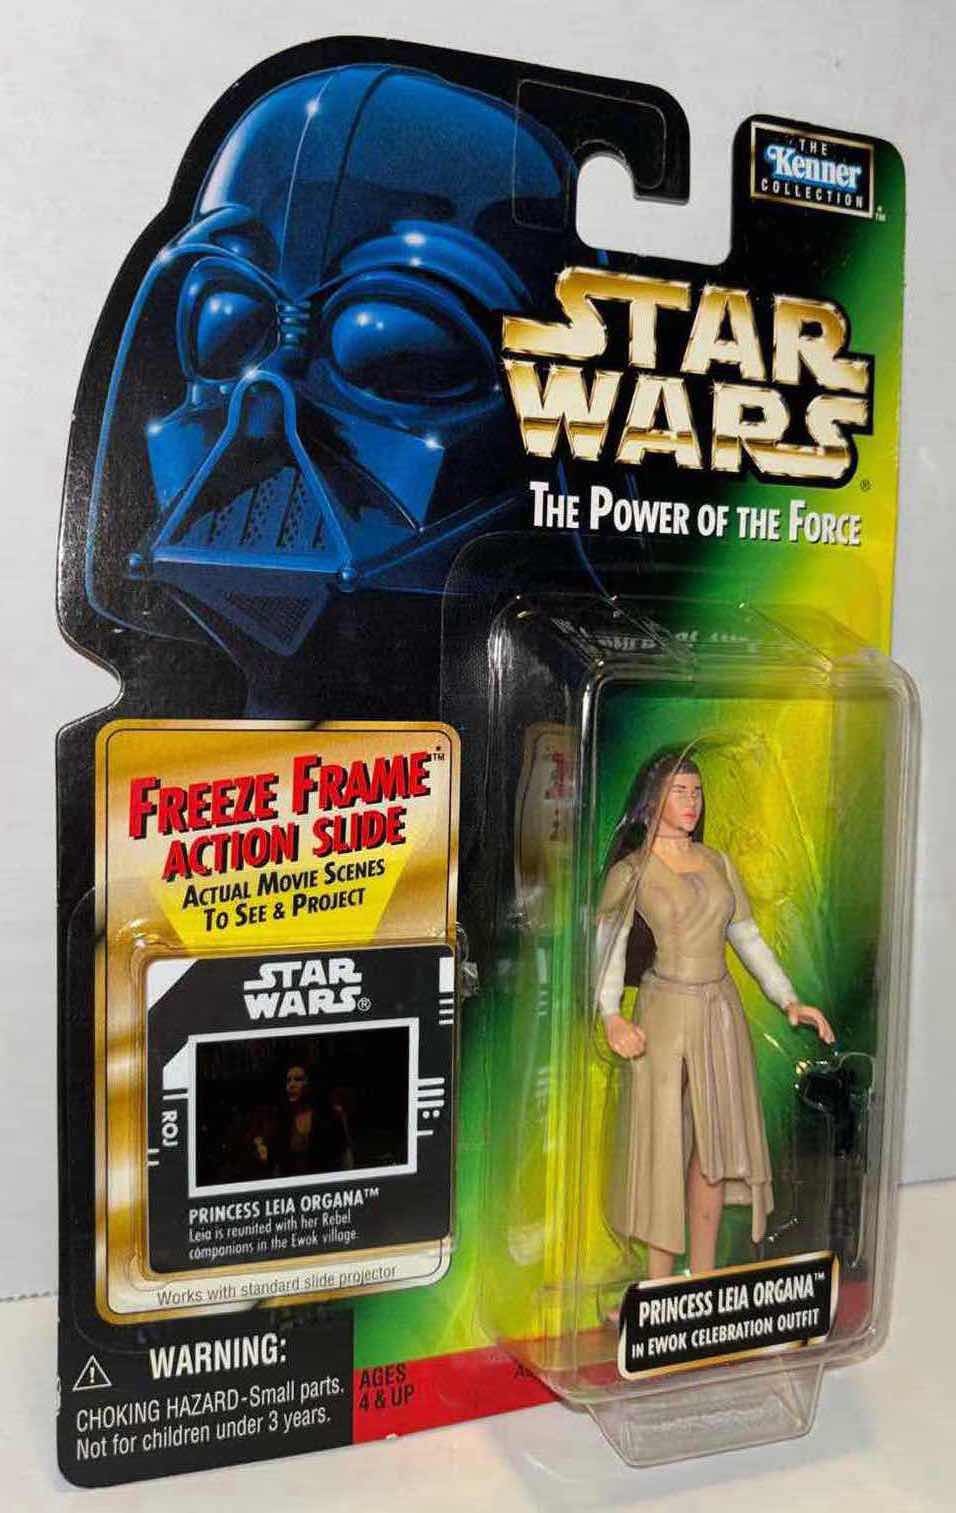 Photo 1 of NEW KENNER STAR WARS THE POWER OF THE FORCE ACTION FIGURE, PRINCESS LEIA ORGANA IN EWOK CELEBRATION OUTFIT & FREEZE FRAME ACTION SLIDE (1)